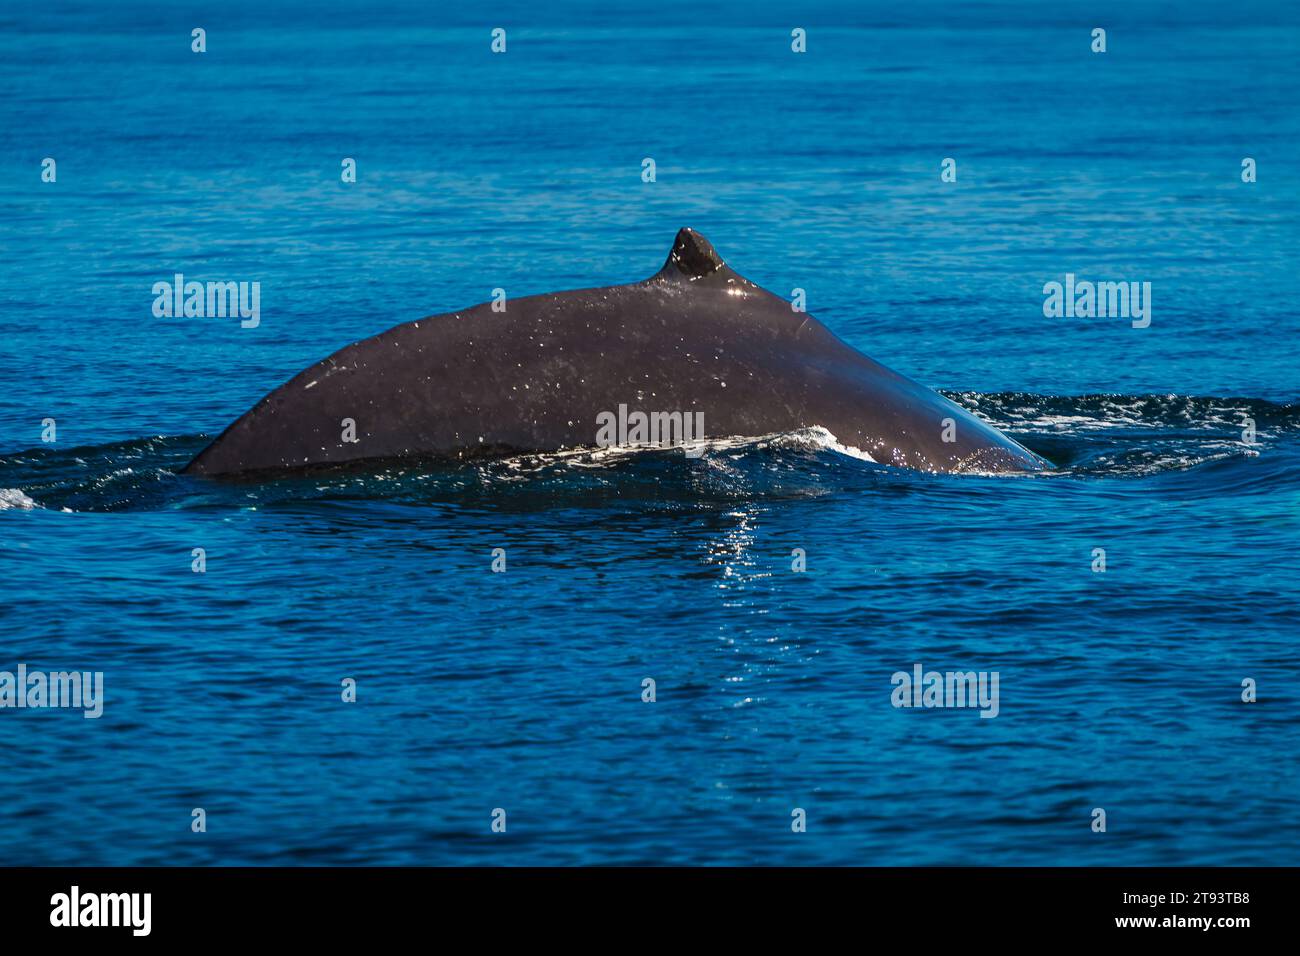 Close-up view of adult Hump Back Whale Dorsal Fin Stock Photo